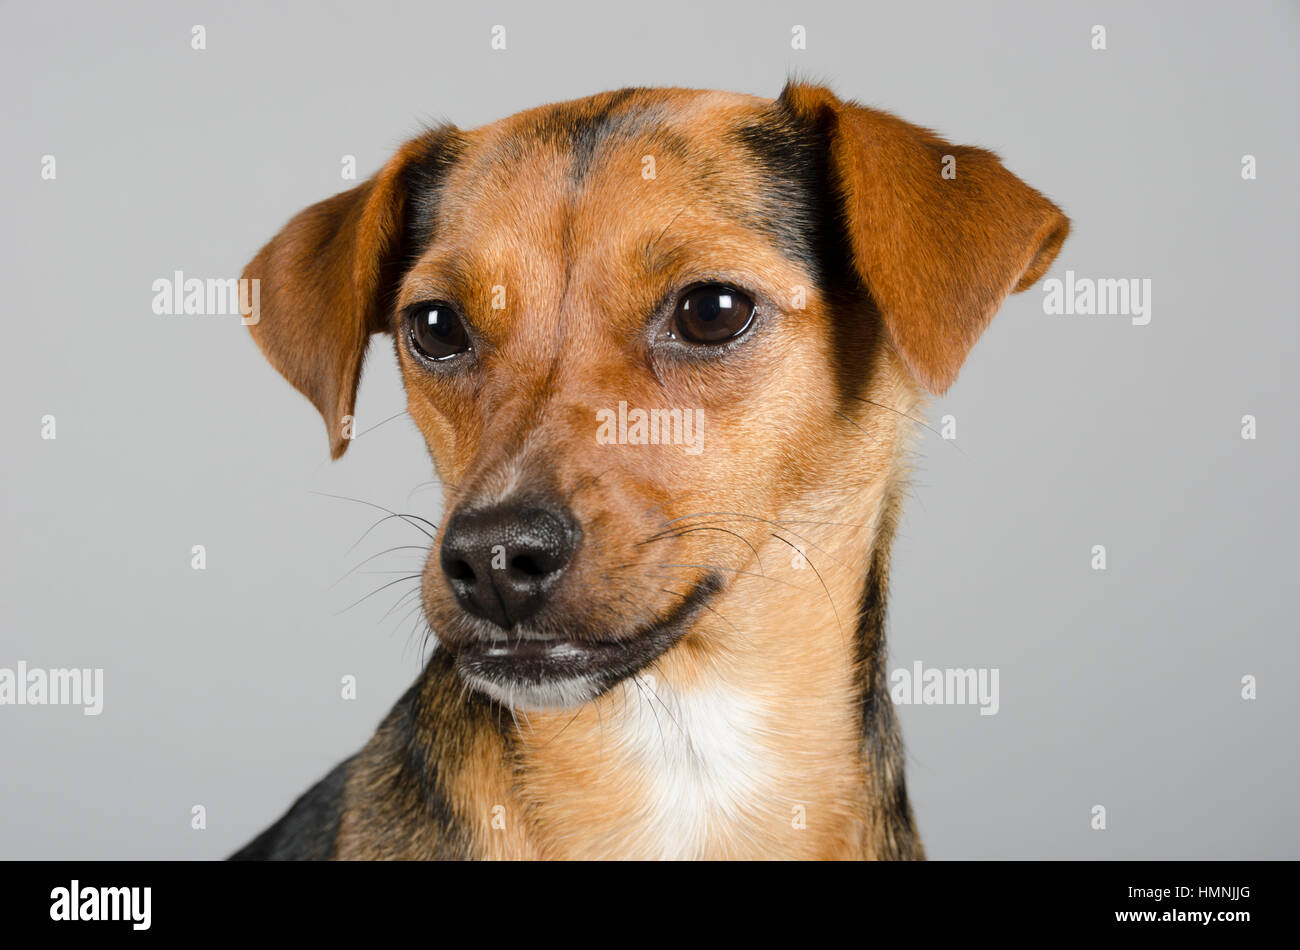 Jackshund (cross between a Jack Russell Terrier & a dachshund), female, 17 months old, UK. Stock Photo